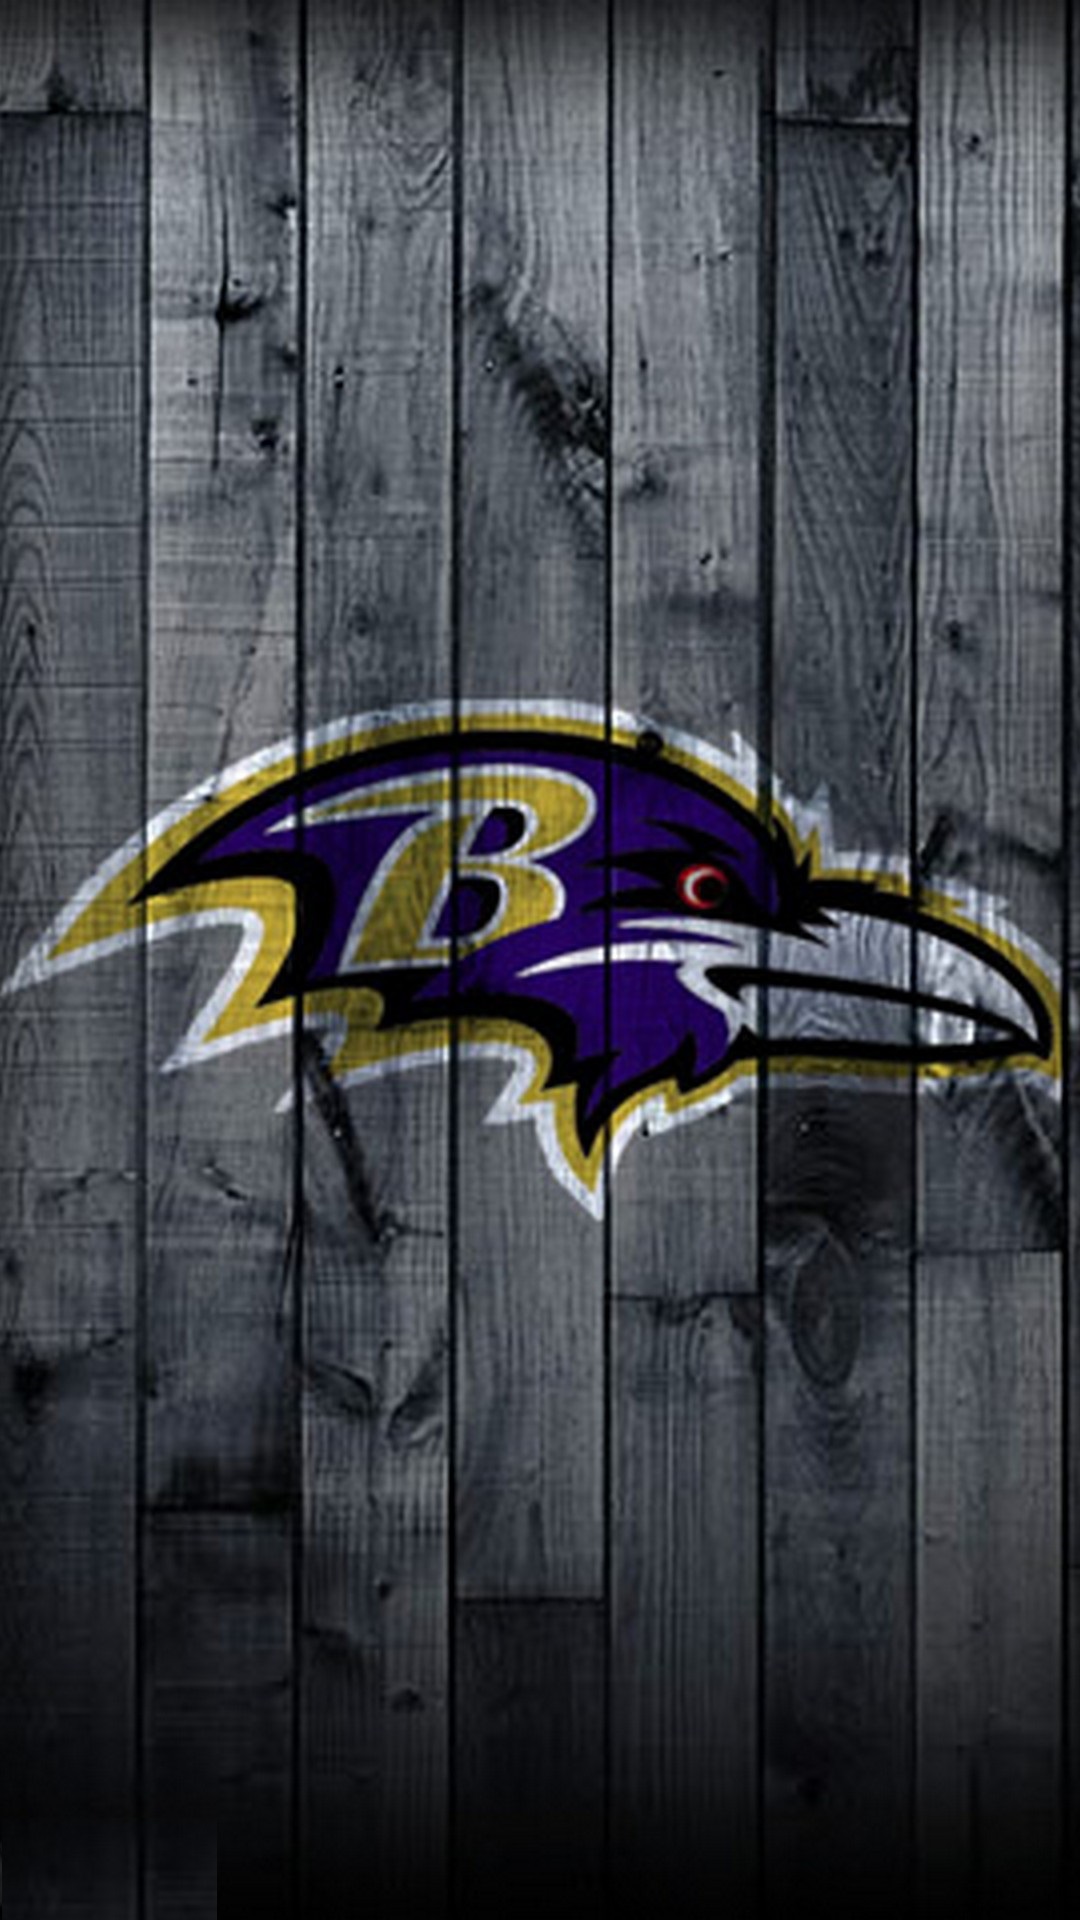 Baltimore Ravens iPhone Wallpaper Home Screen With high-resolution 1080X1920 pixel. Download and set as wallpaper for Apple iPhone X, XS Max, XR, 8, 7, 6, SE, iPad, Android